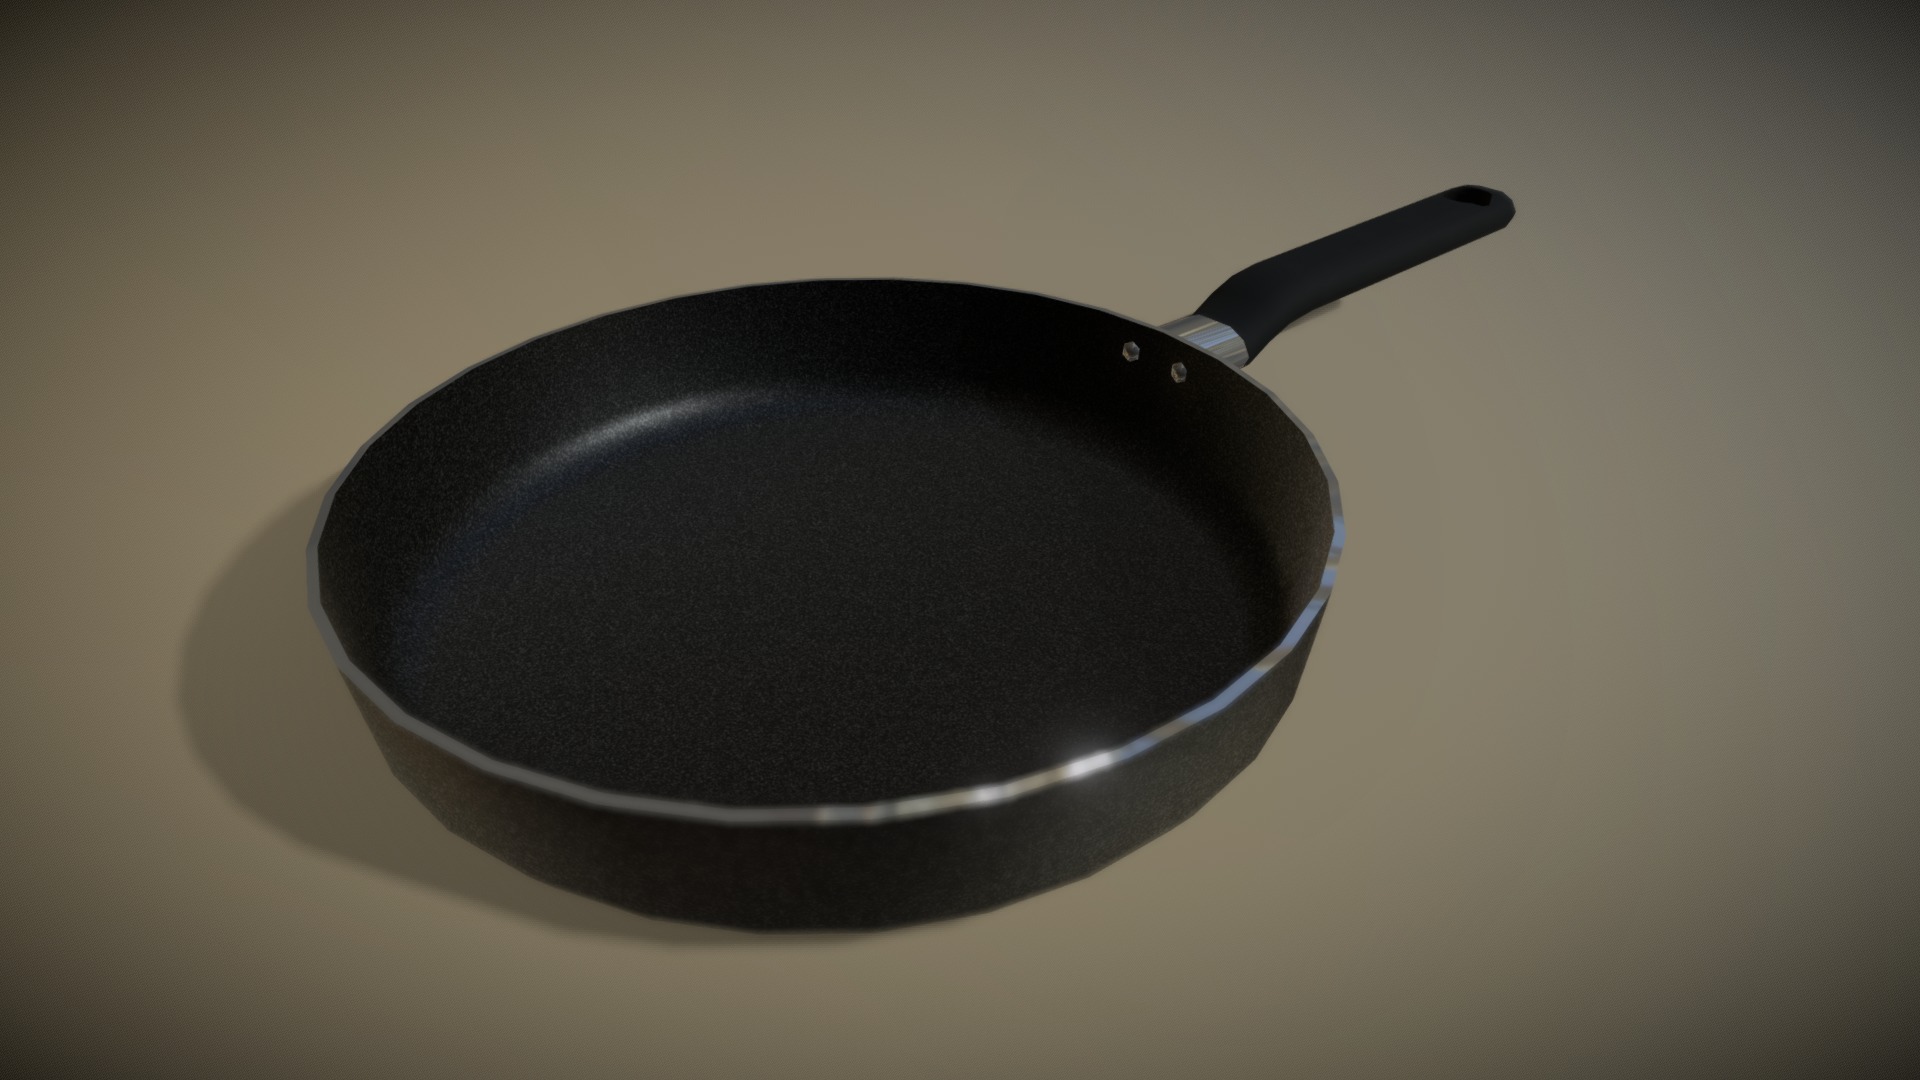 3D model Frying Pan Ø28cm - This is a 3D model of the Frying Pan Ø28cm. The 3D model is about a black pan on a white surface.